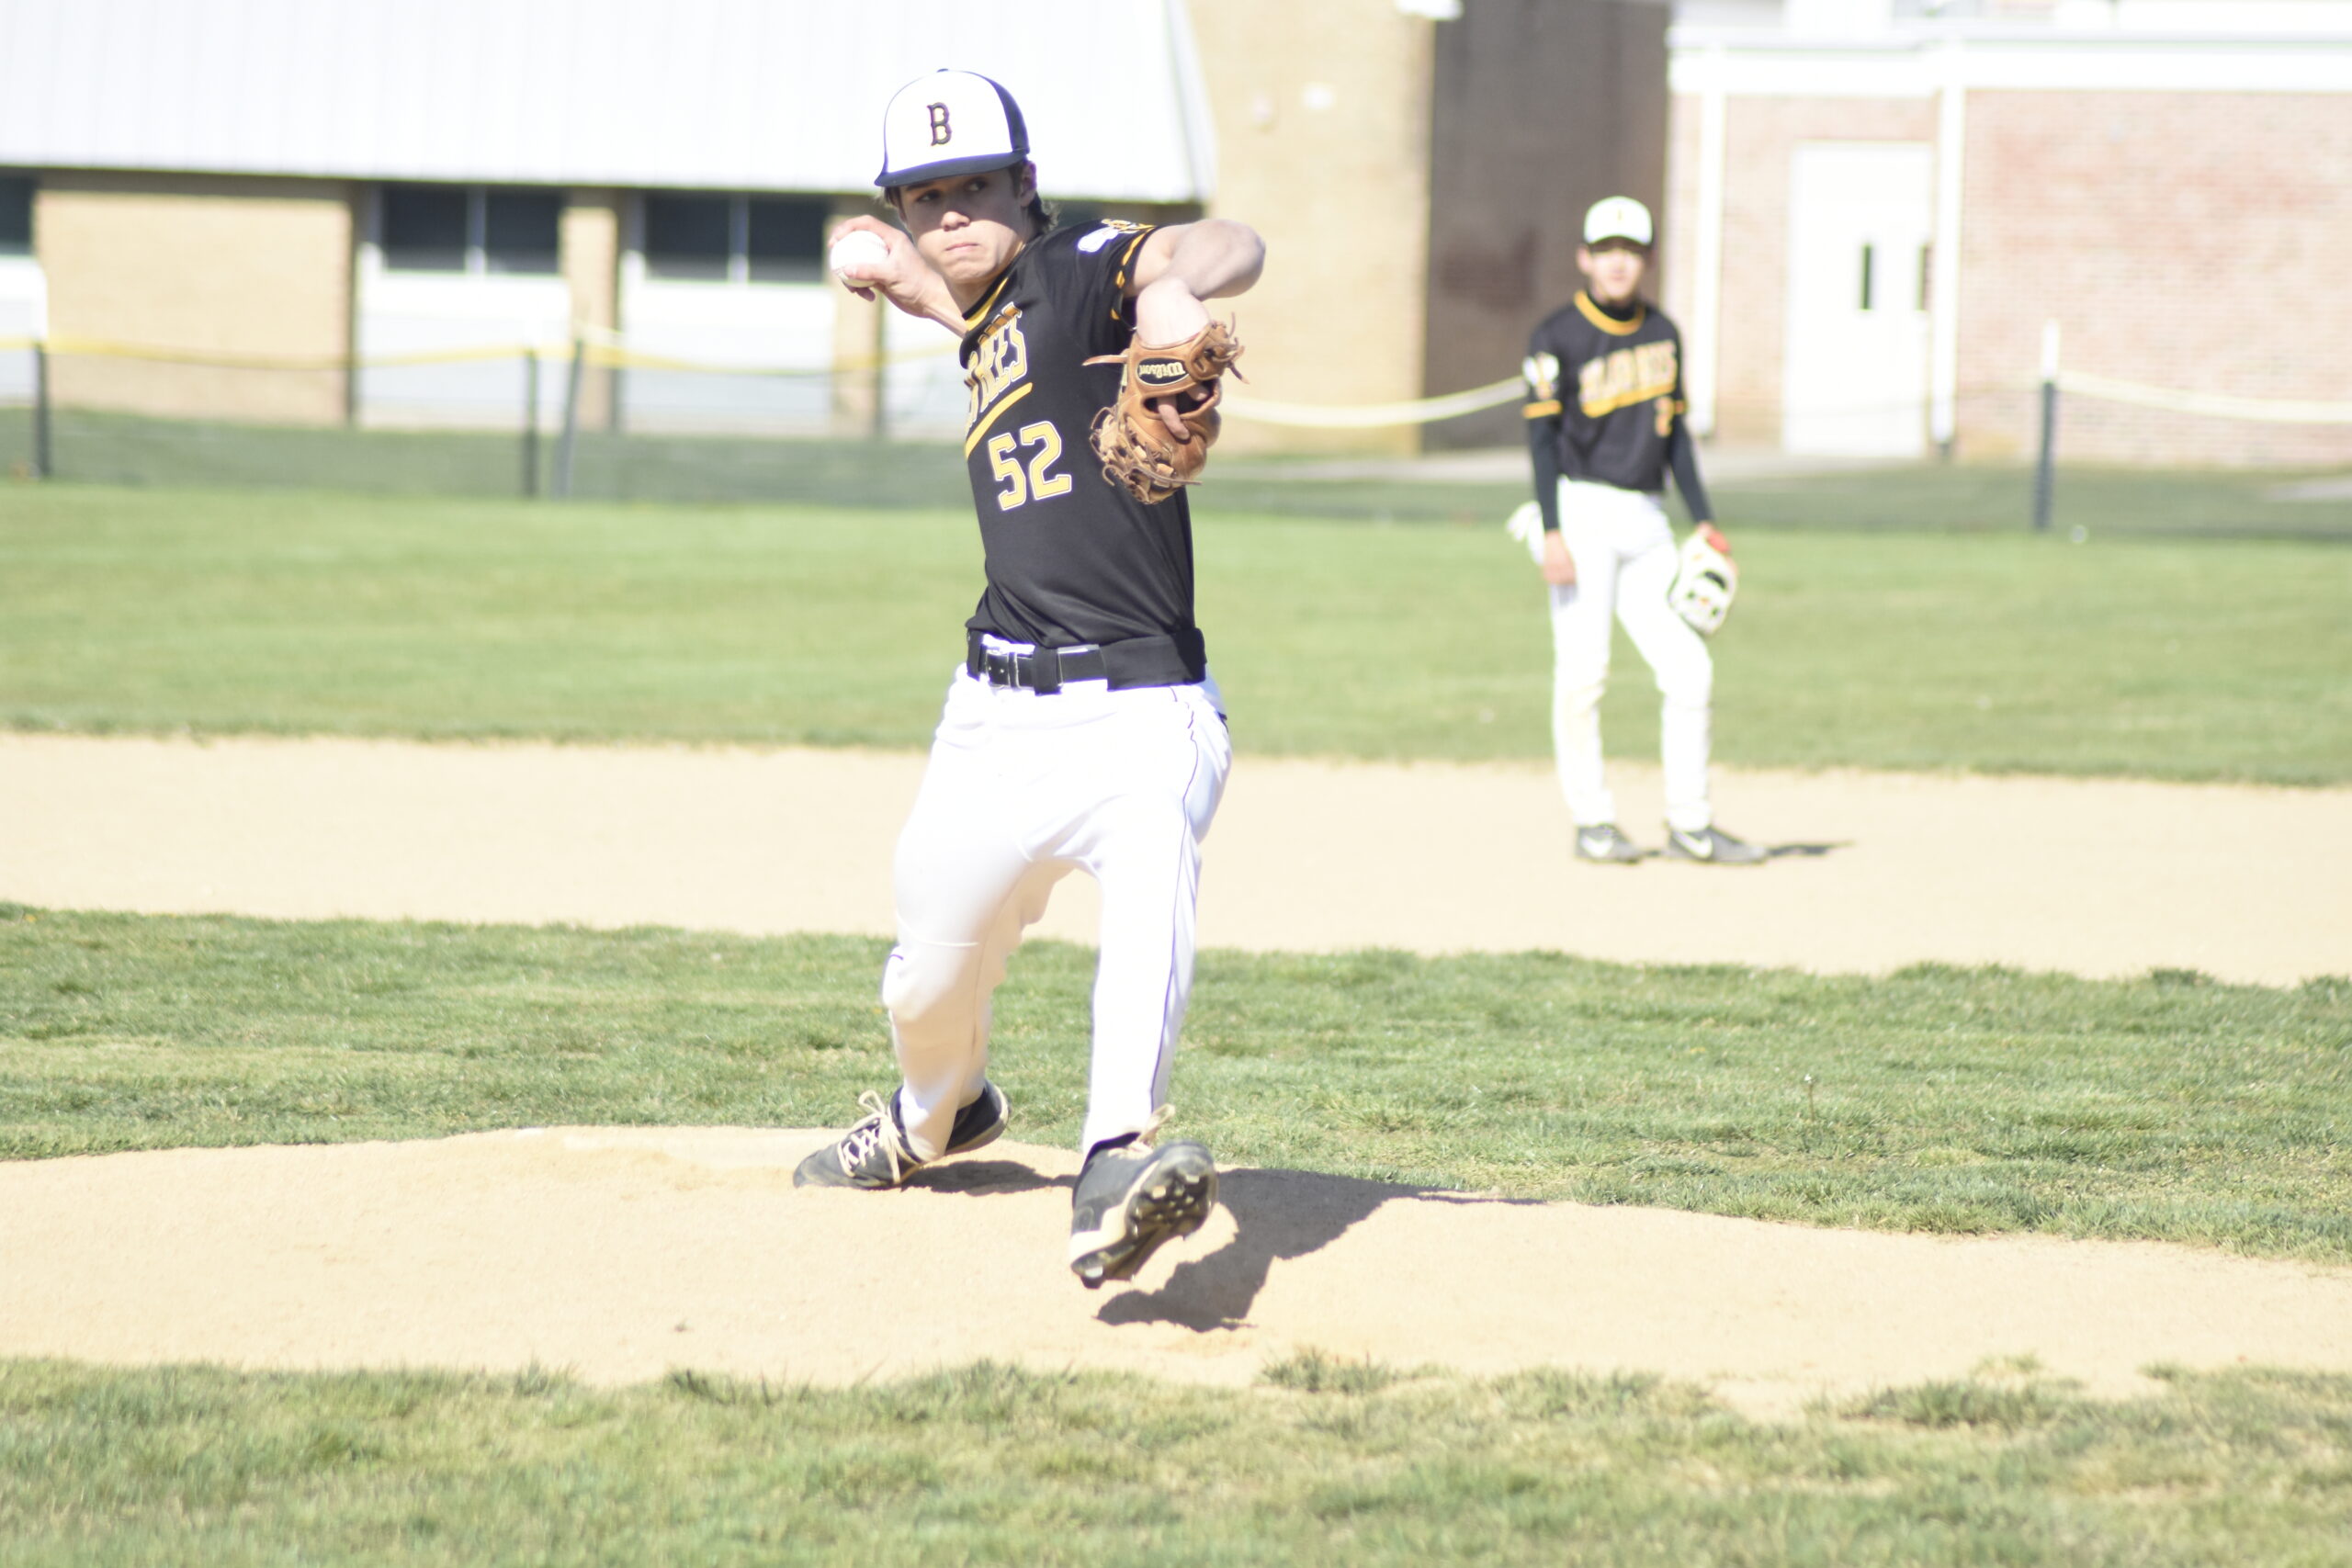 Ross School's Milo Tompkins started on the mound for the Bees in Friday's game.   DREW BUDD